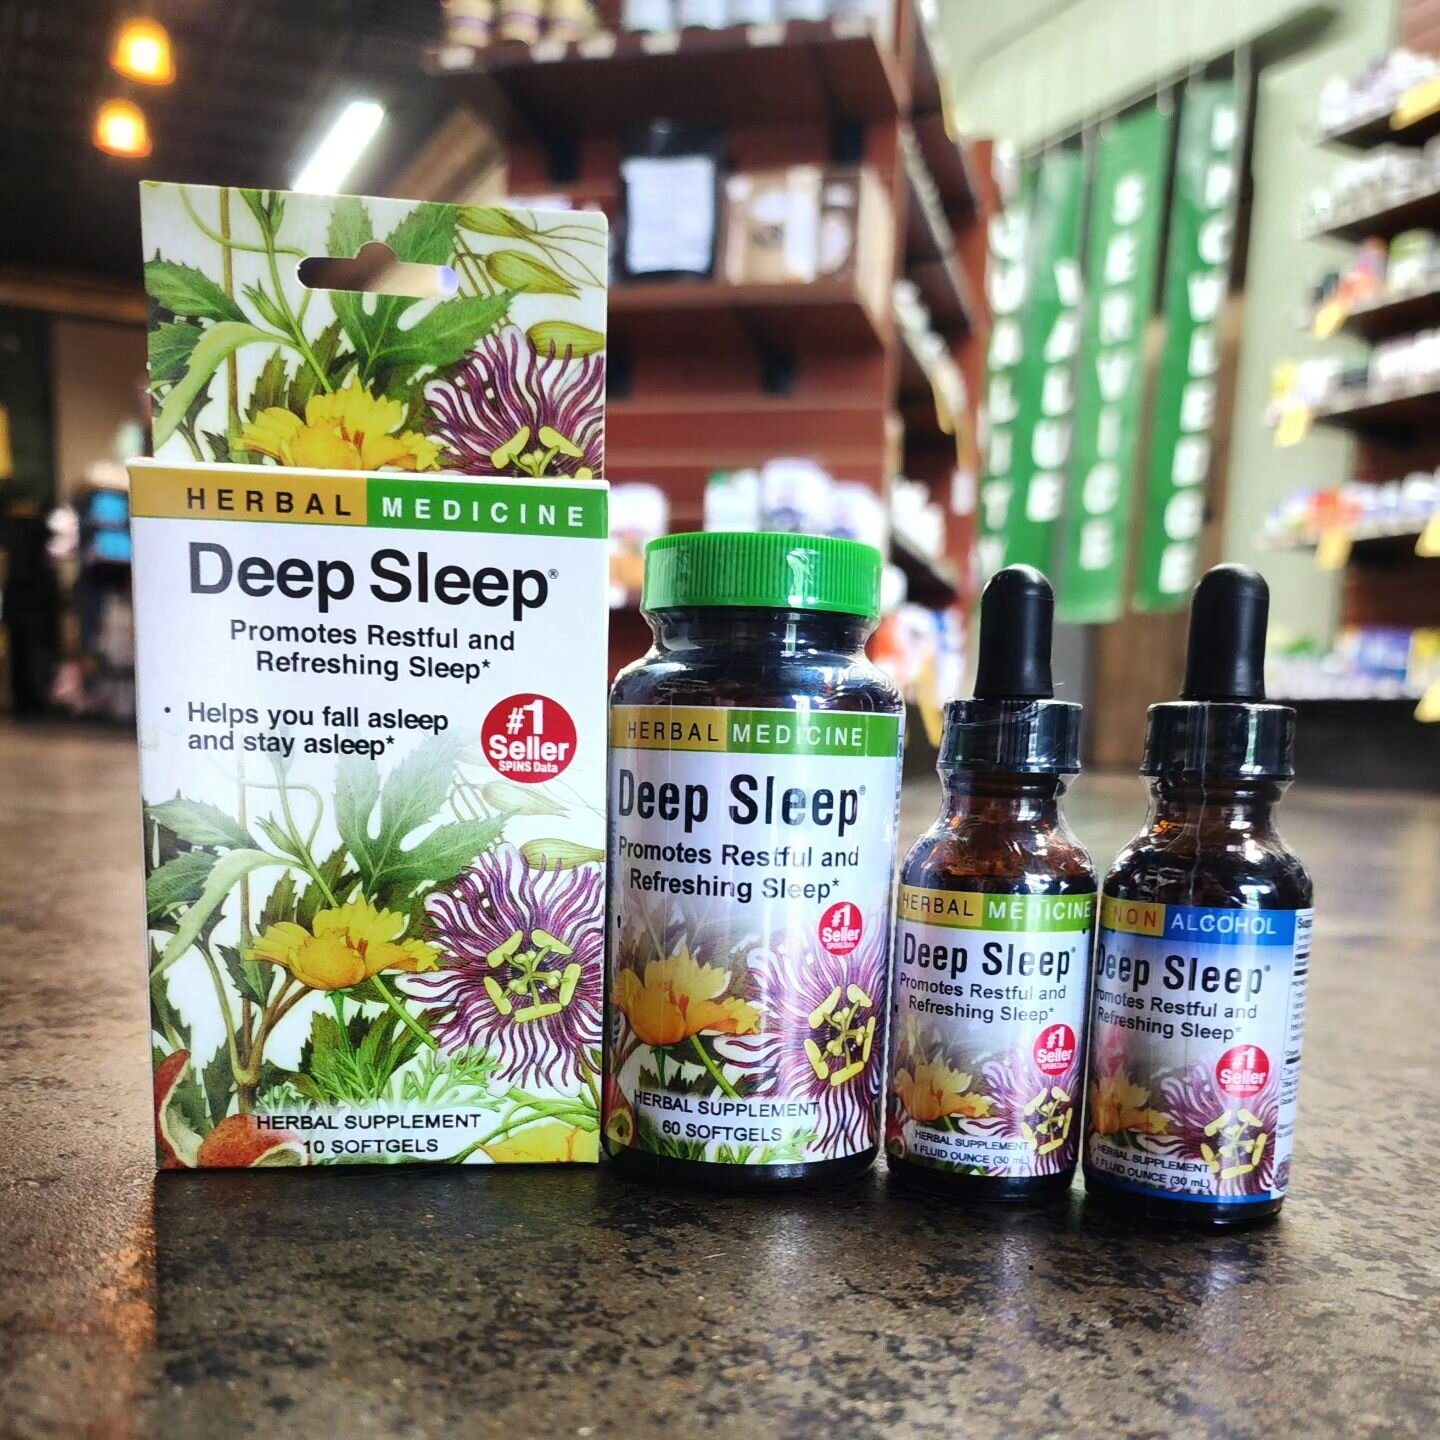 Come in and find out why Deep Sleep&reg; has been America&rsquo;s #1 selling Herbal Sleep Aid since 2004! 🌿💤
Open from 9a-6p! ✨️